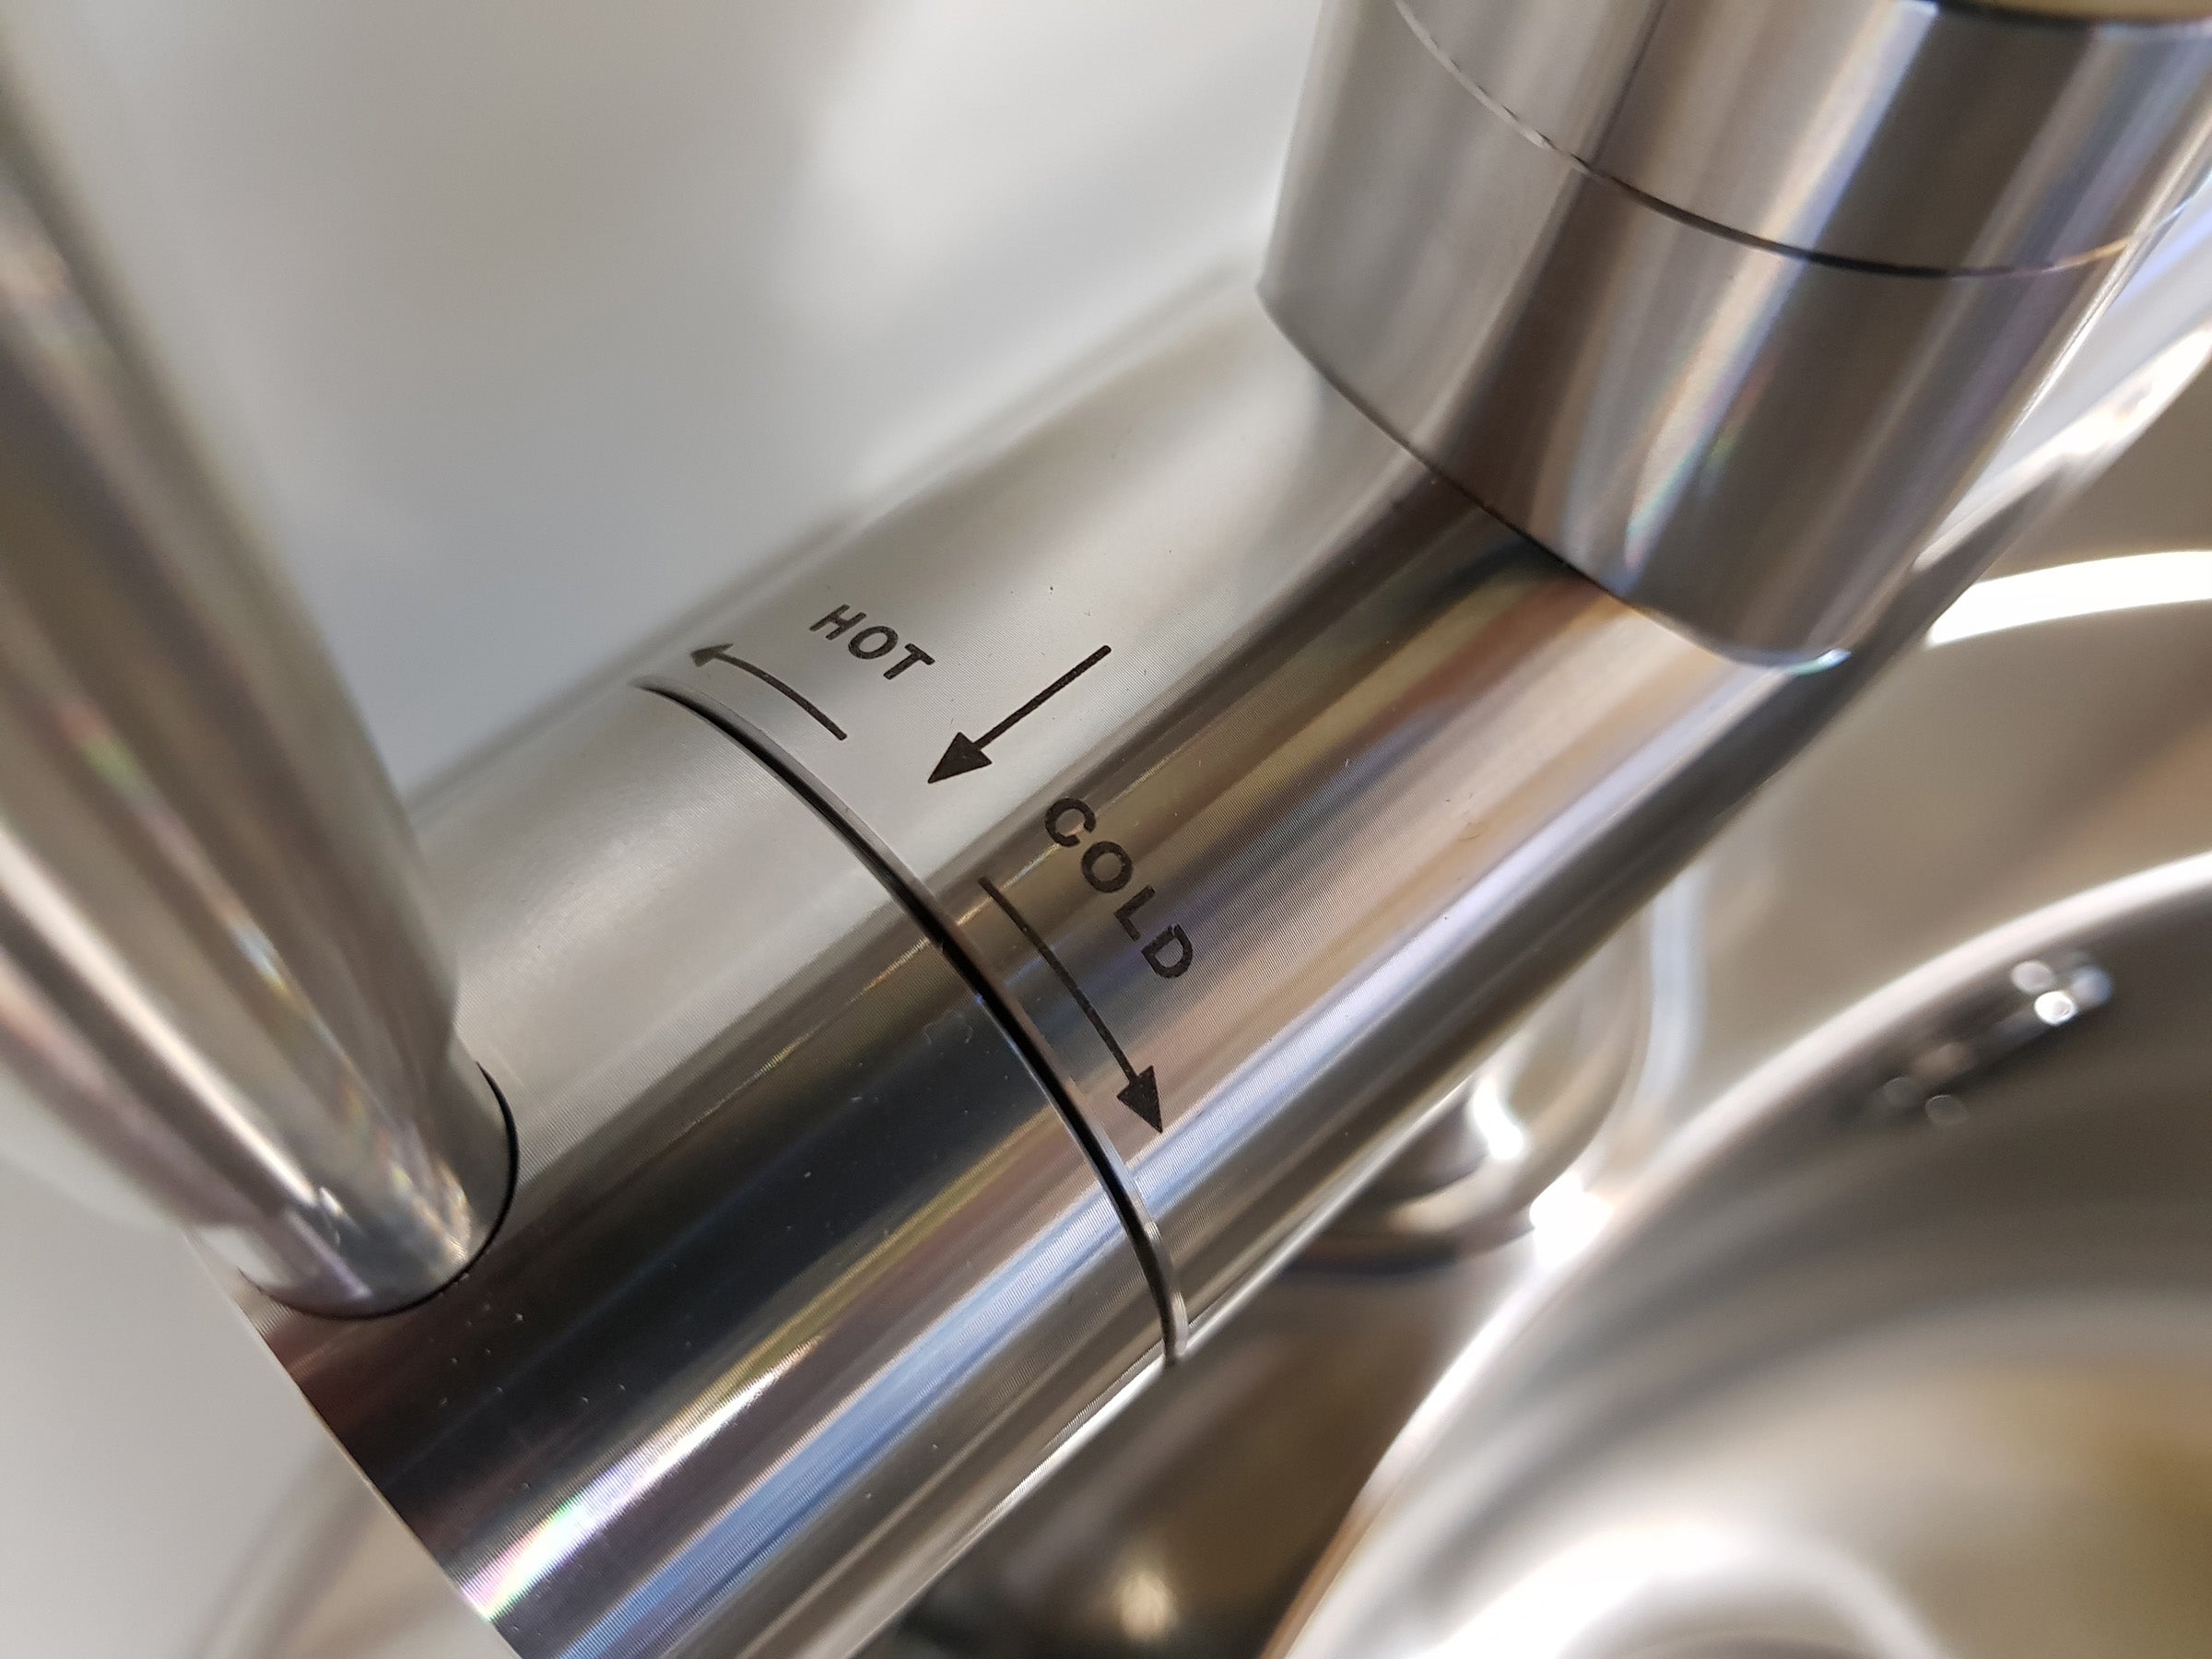 Close-up of Franke boiling tap with hot and cold indicators.